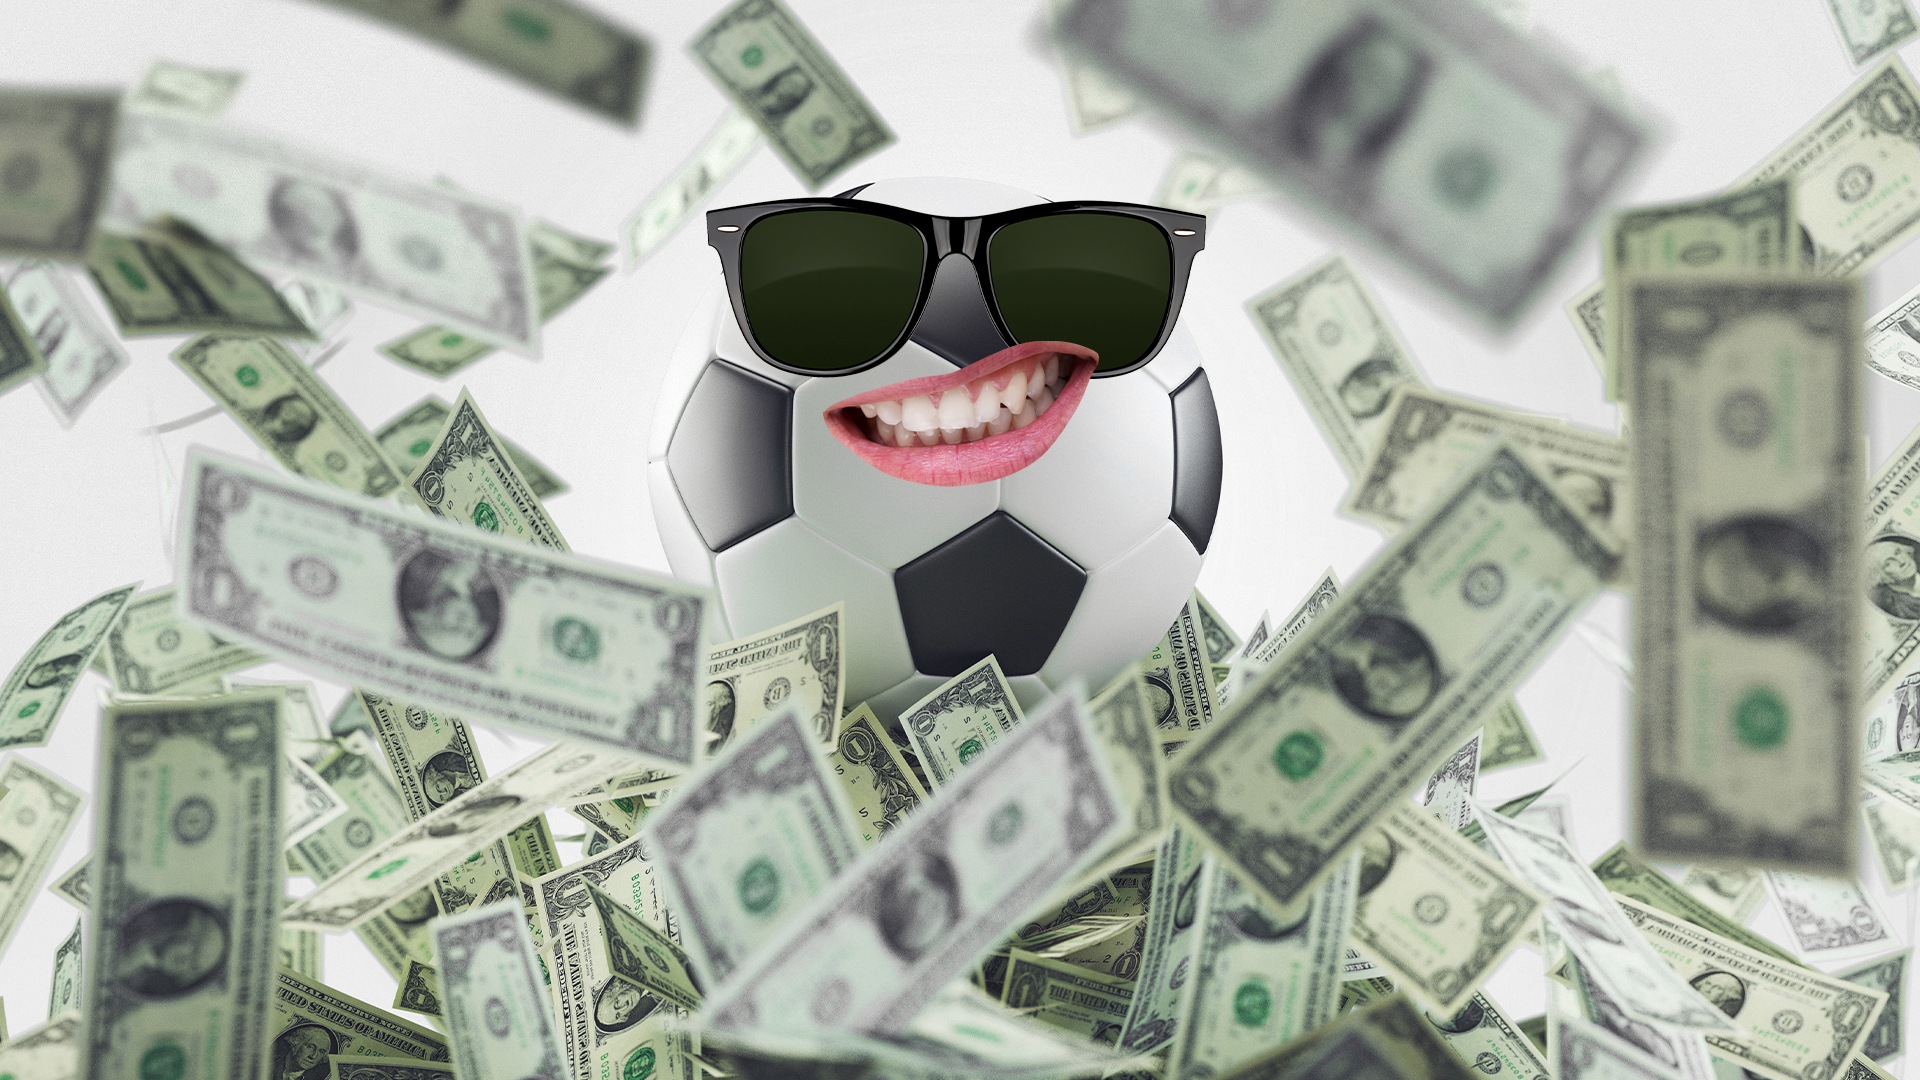 Football in sunglasses surrounded by money